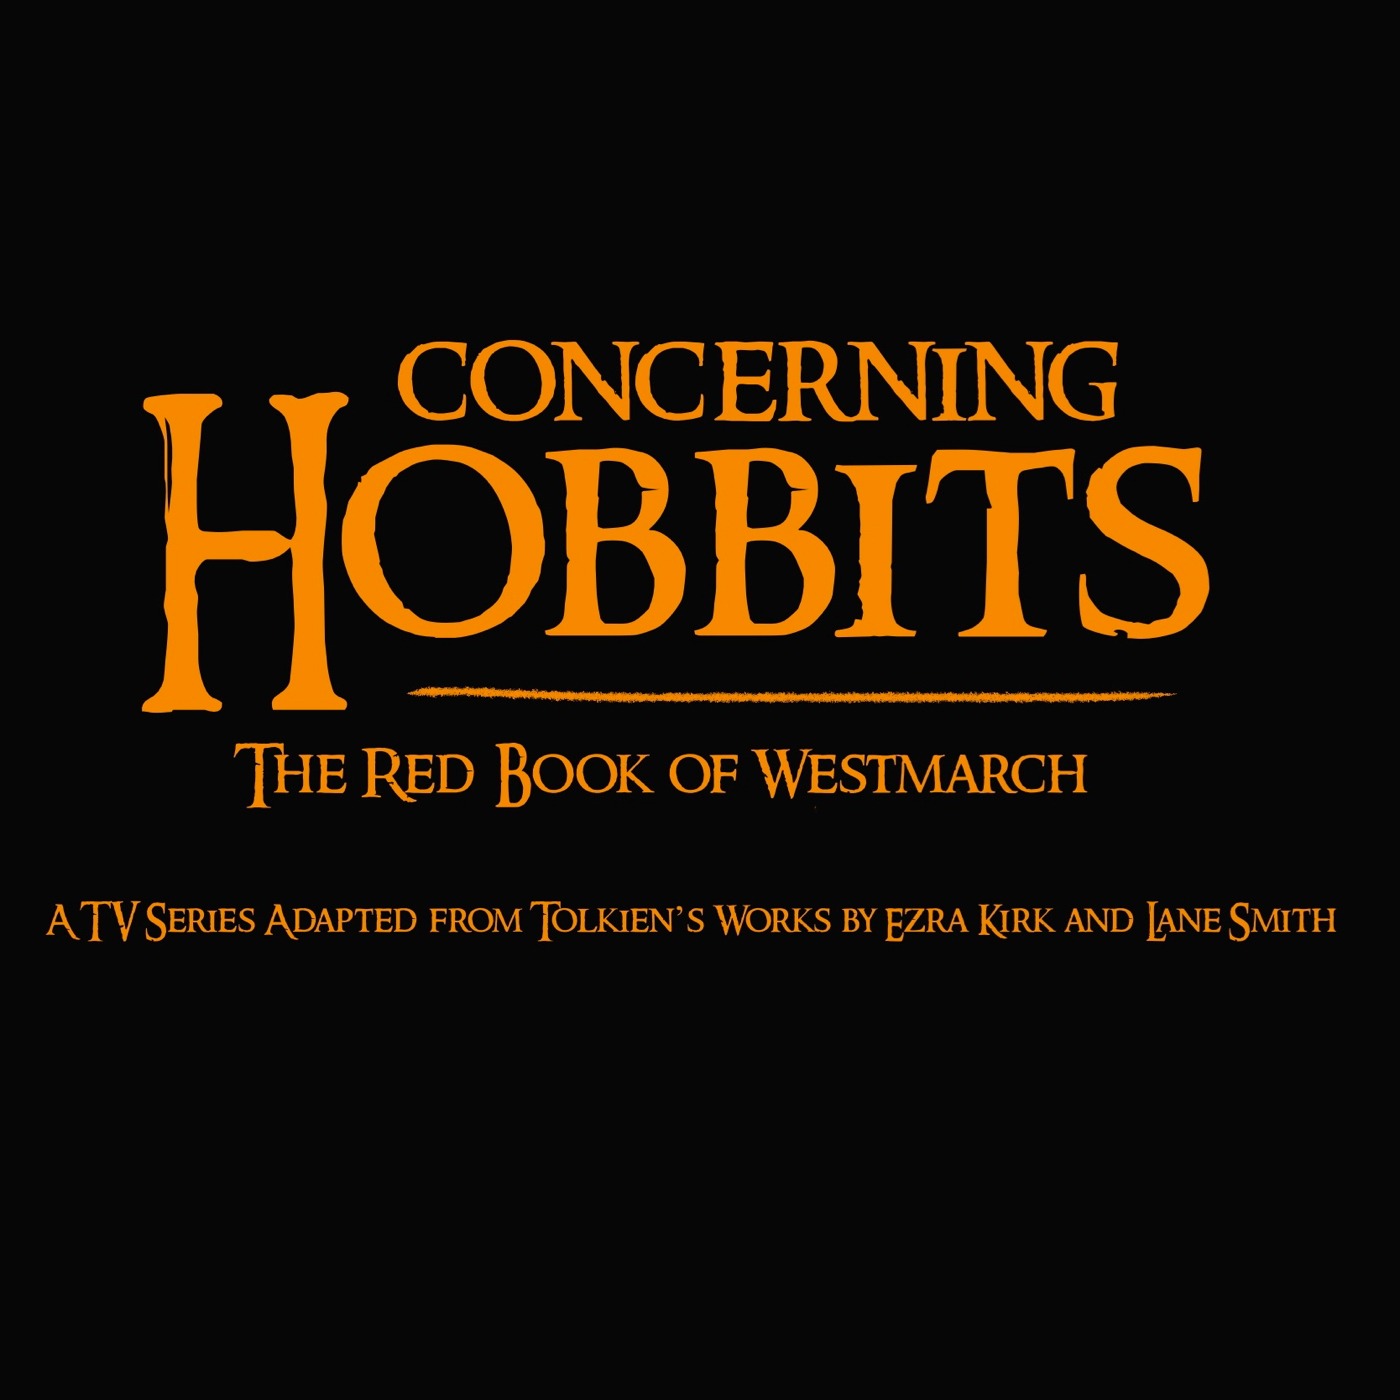 Concerning Hobbits: The Red Book of Westmarch - Season 2: Part 1